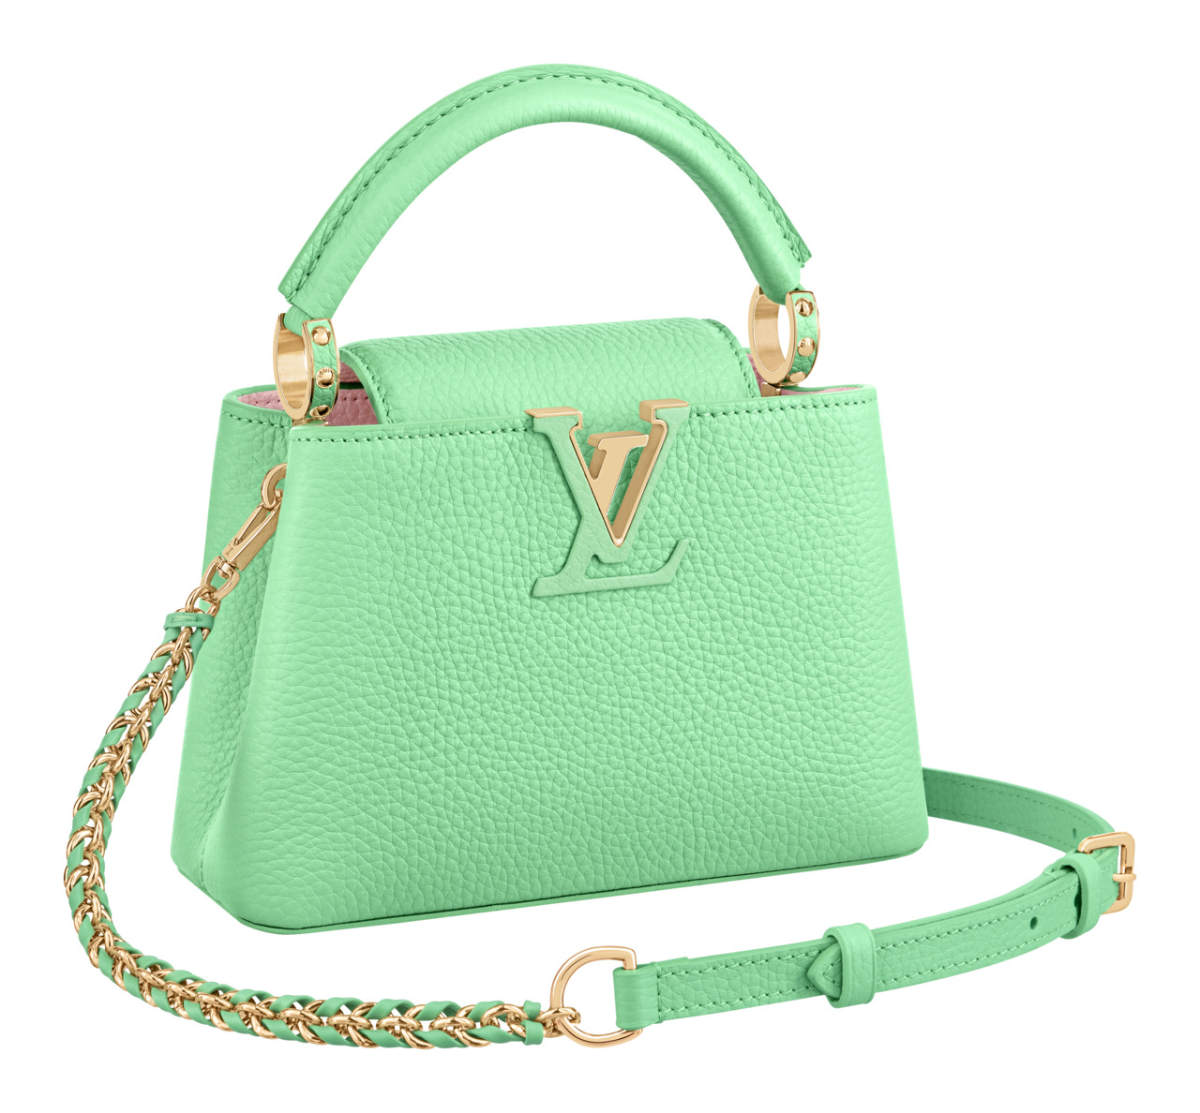 MANIFESTO - REAL-LIFE MERMAIDS, THIS IS YOUR WAVY ONSHORE BAG: Louis  Vuitton's Capucines Mini Bags